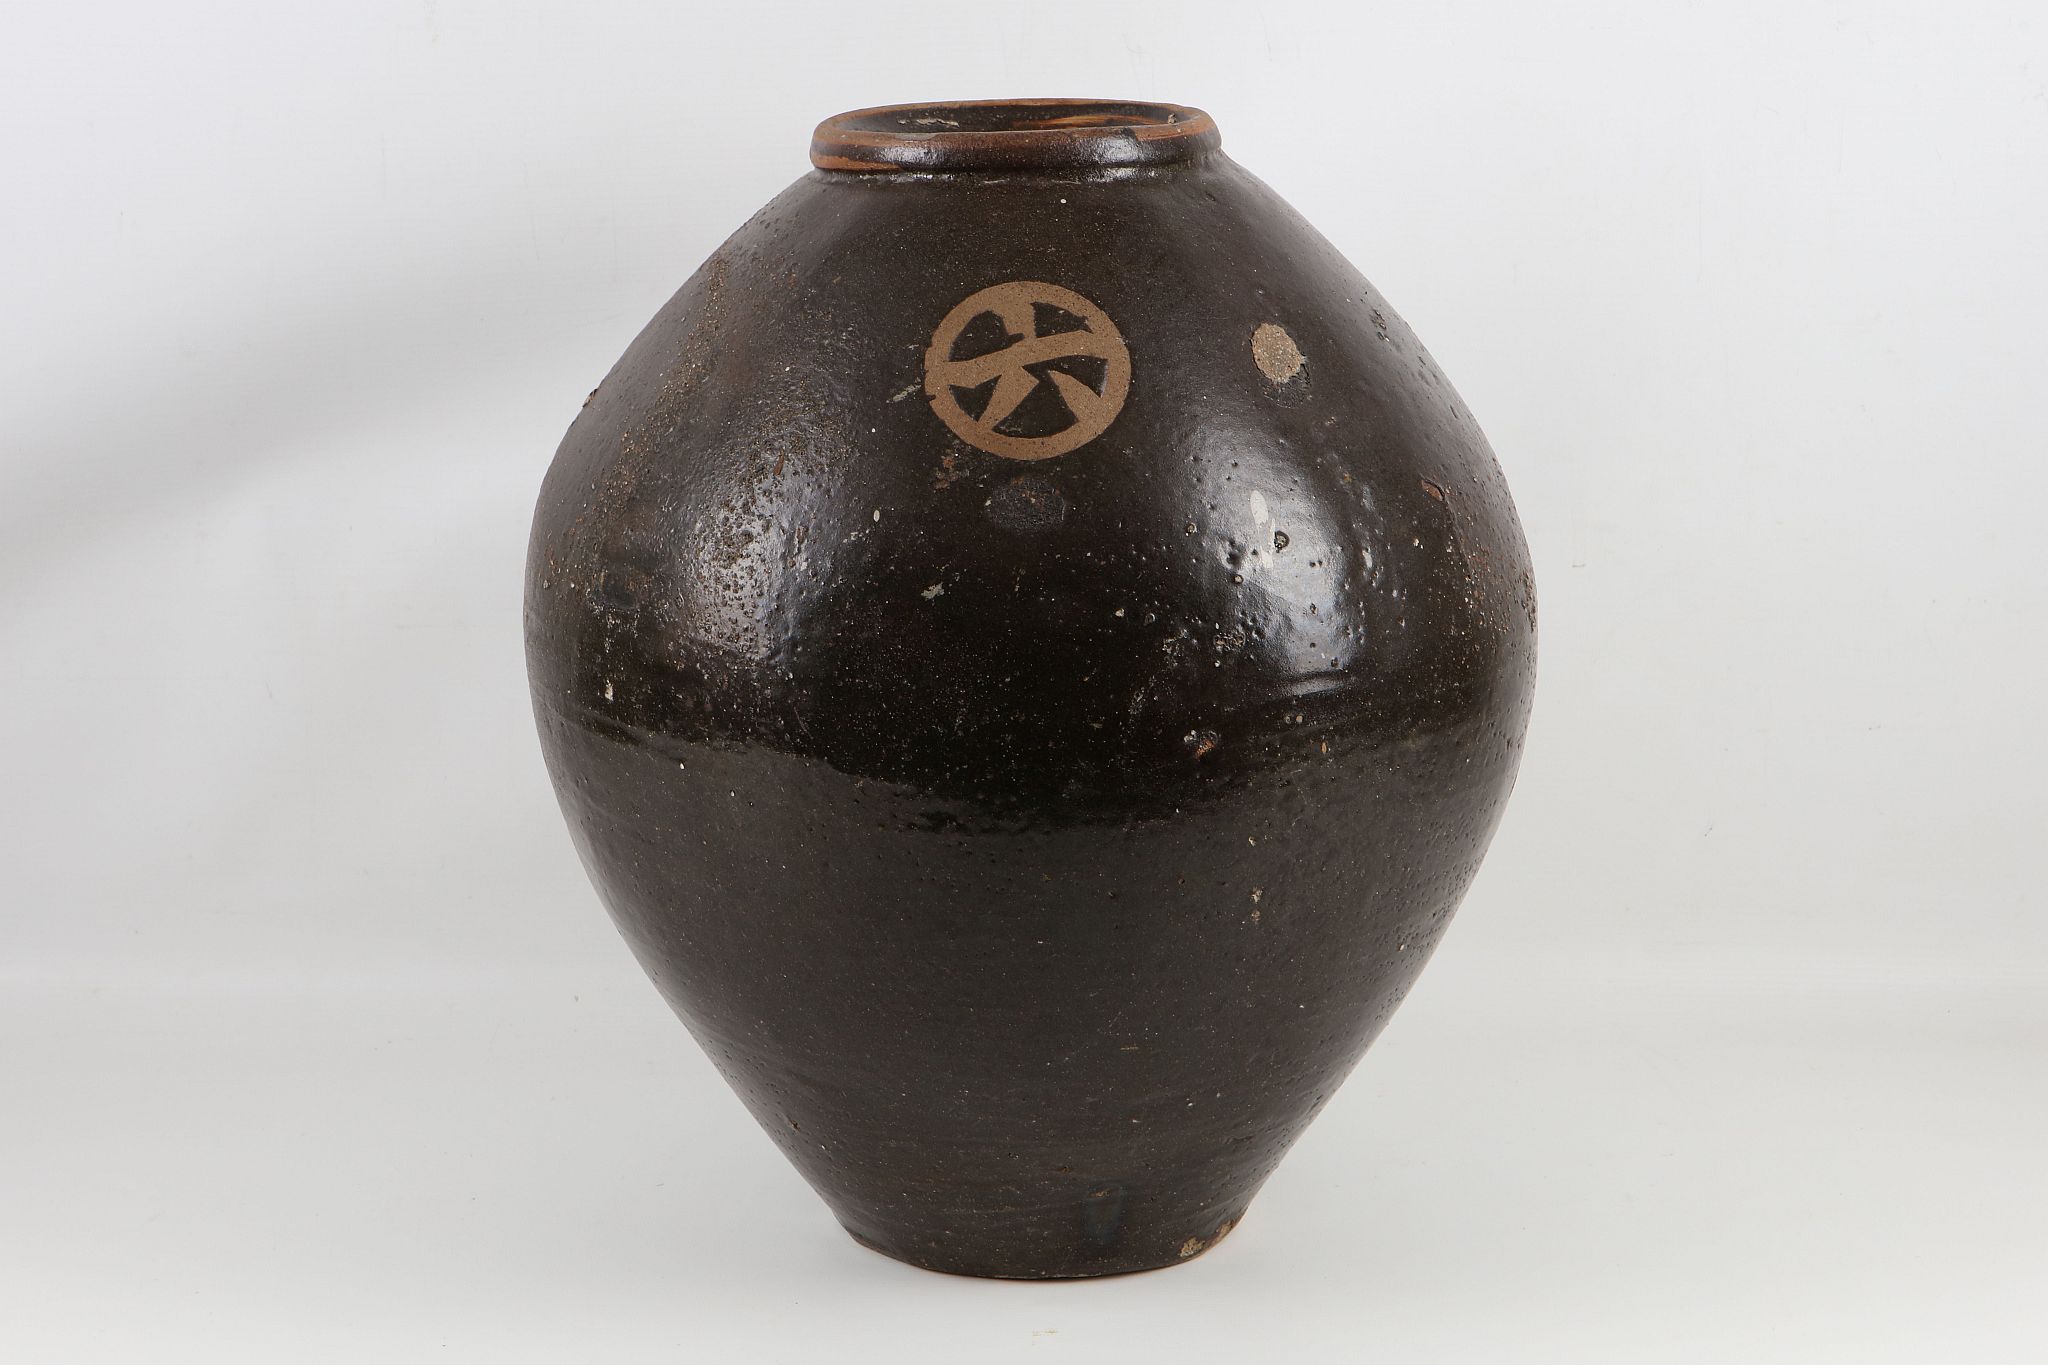 A late 19th / early 20th Century large terracotta pot in dark brown glaze.